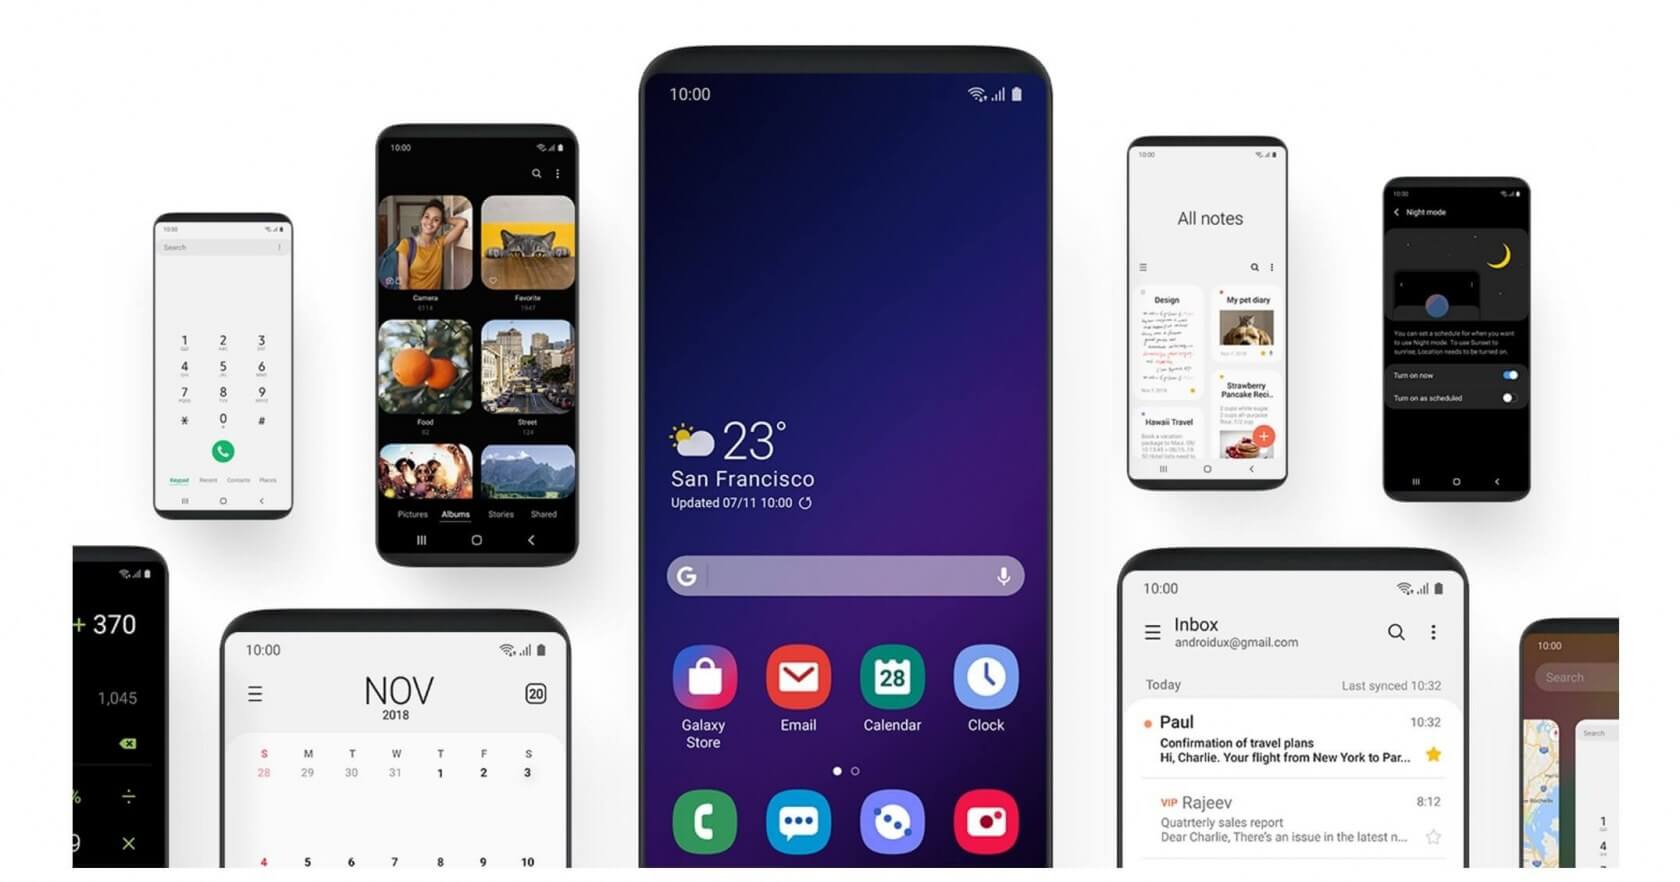 Samsung's updated 'One UI' Android skin will come to Galaxy S8, Note 8 devices